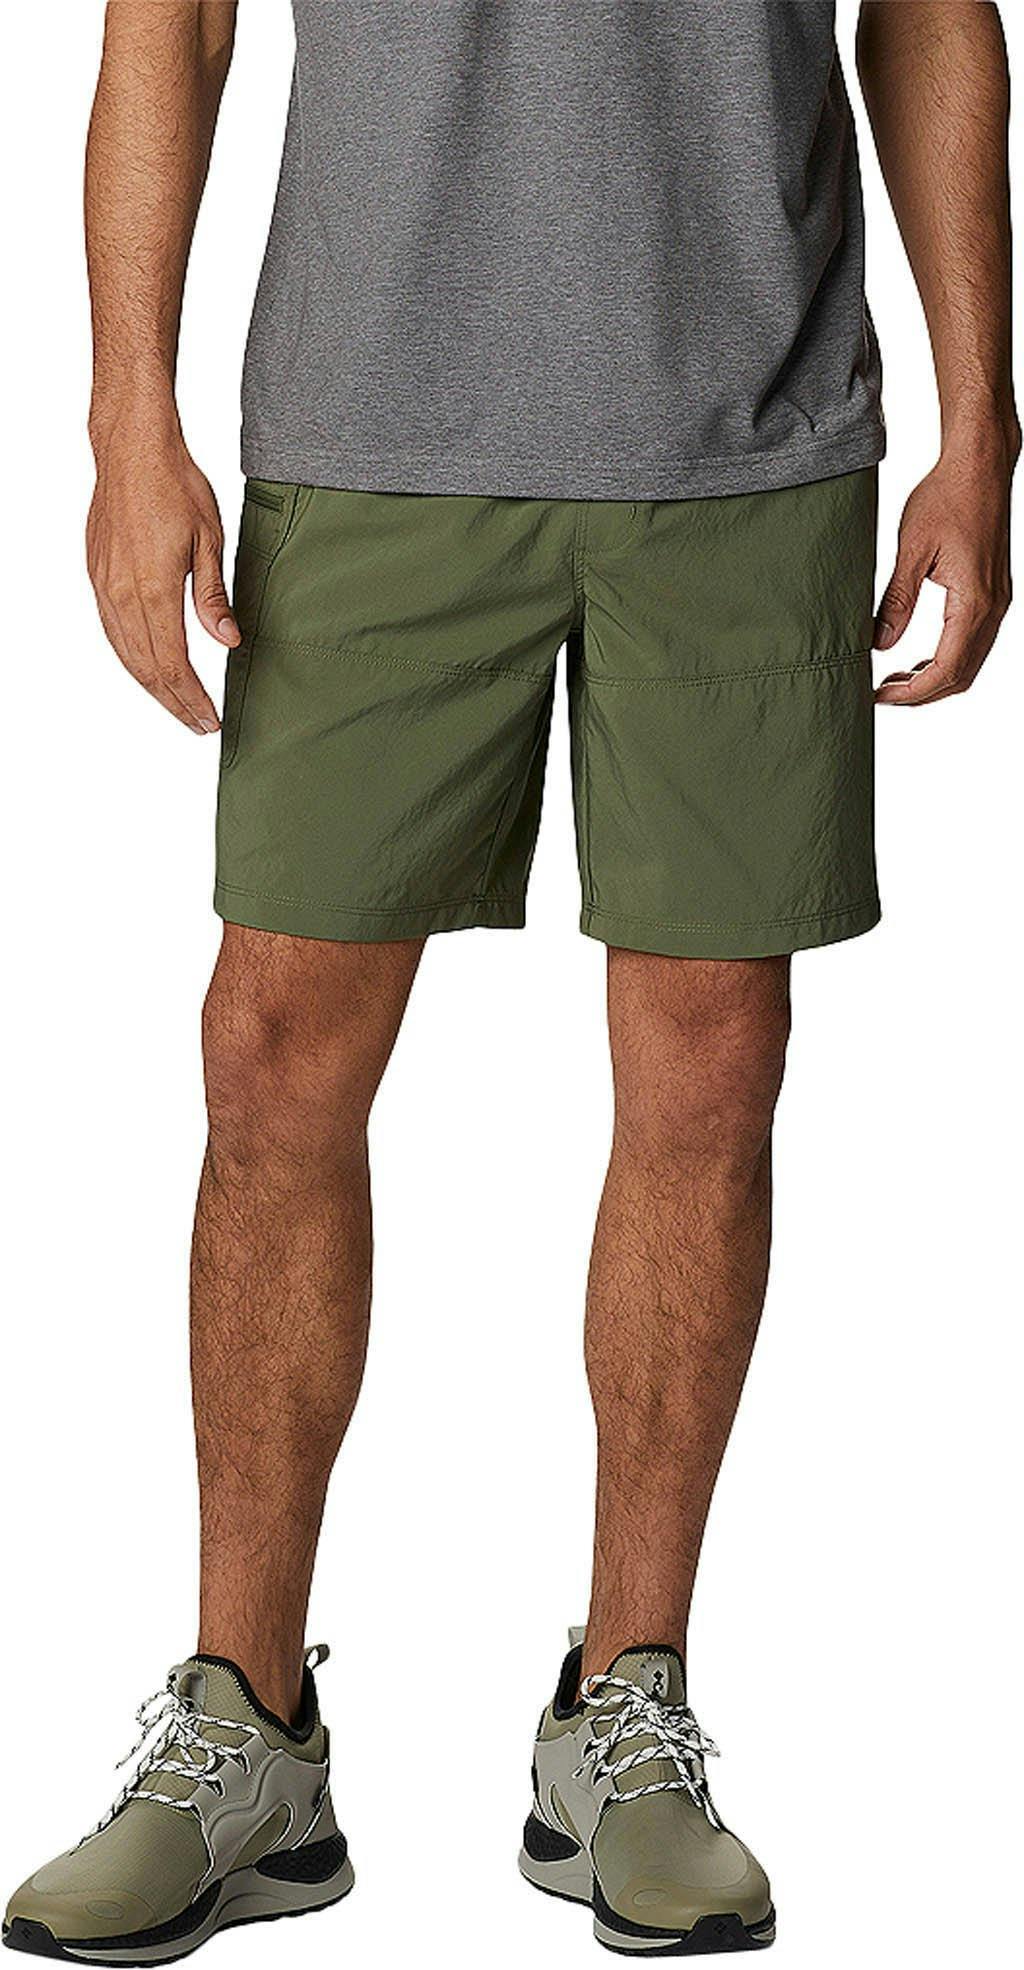 Product image for Coral Ridge™ Pull-On Shorts - Big size - Men's